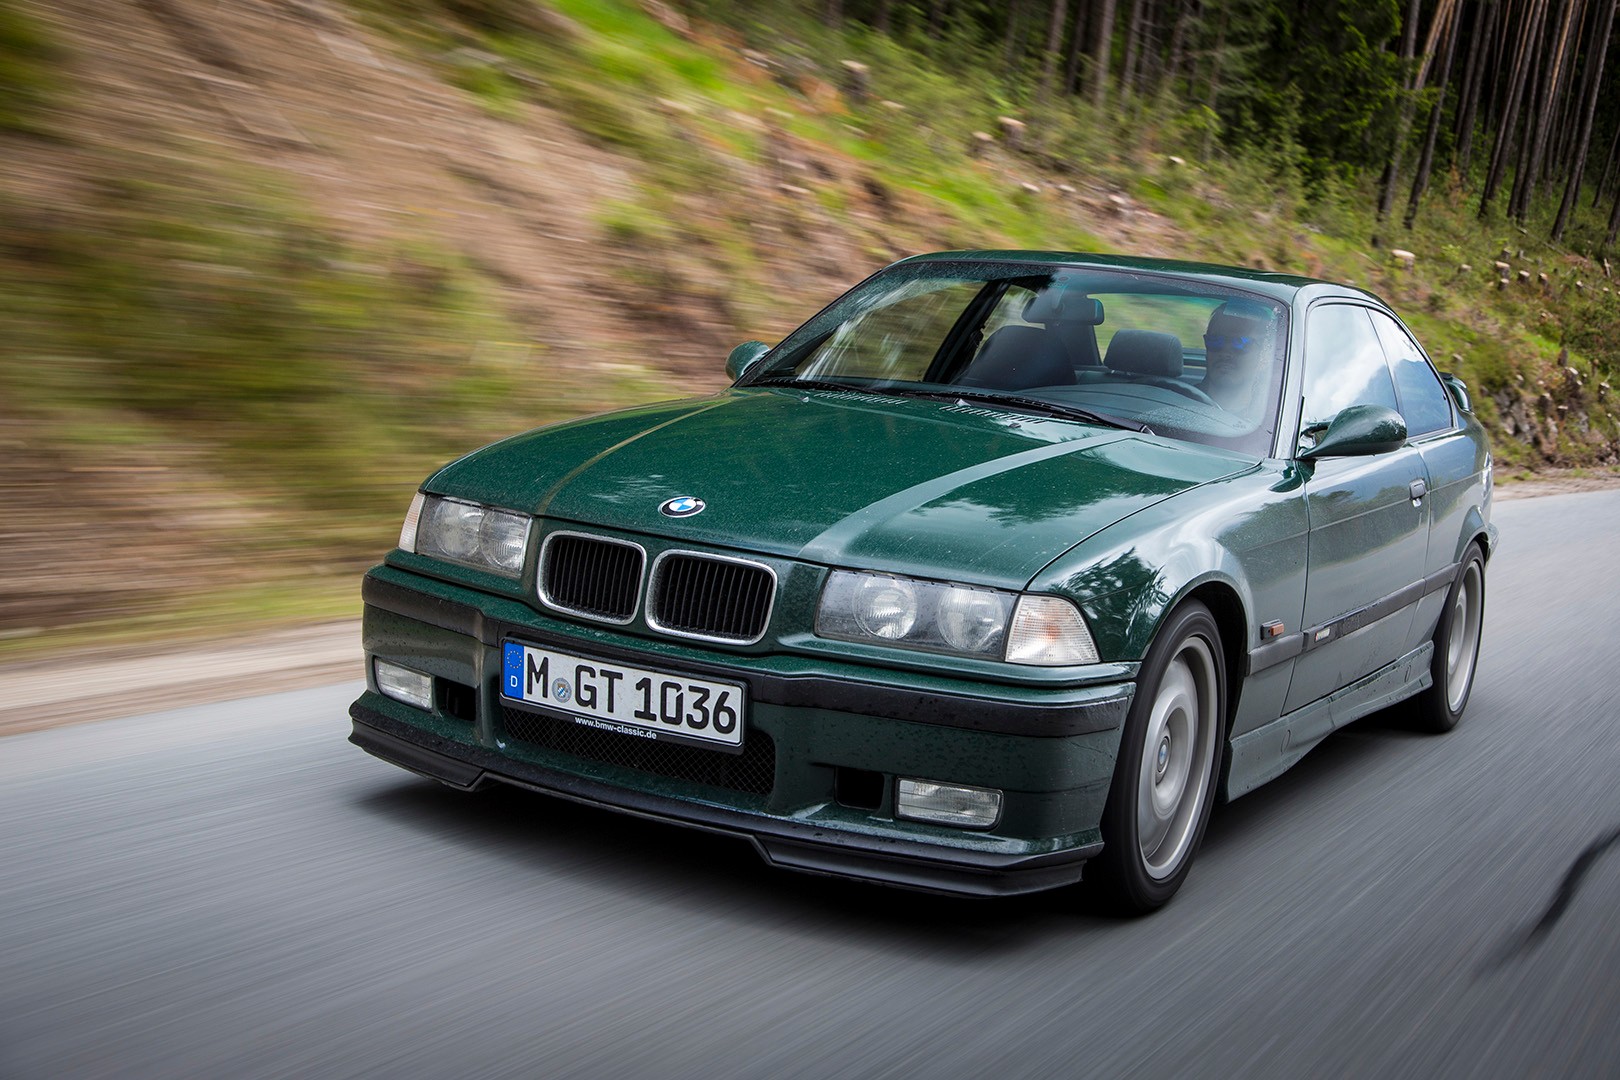 This 1995 BMW E36 M3 GT Has Had Over $312,000 Spent On It